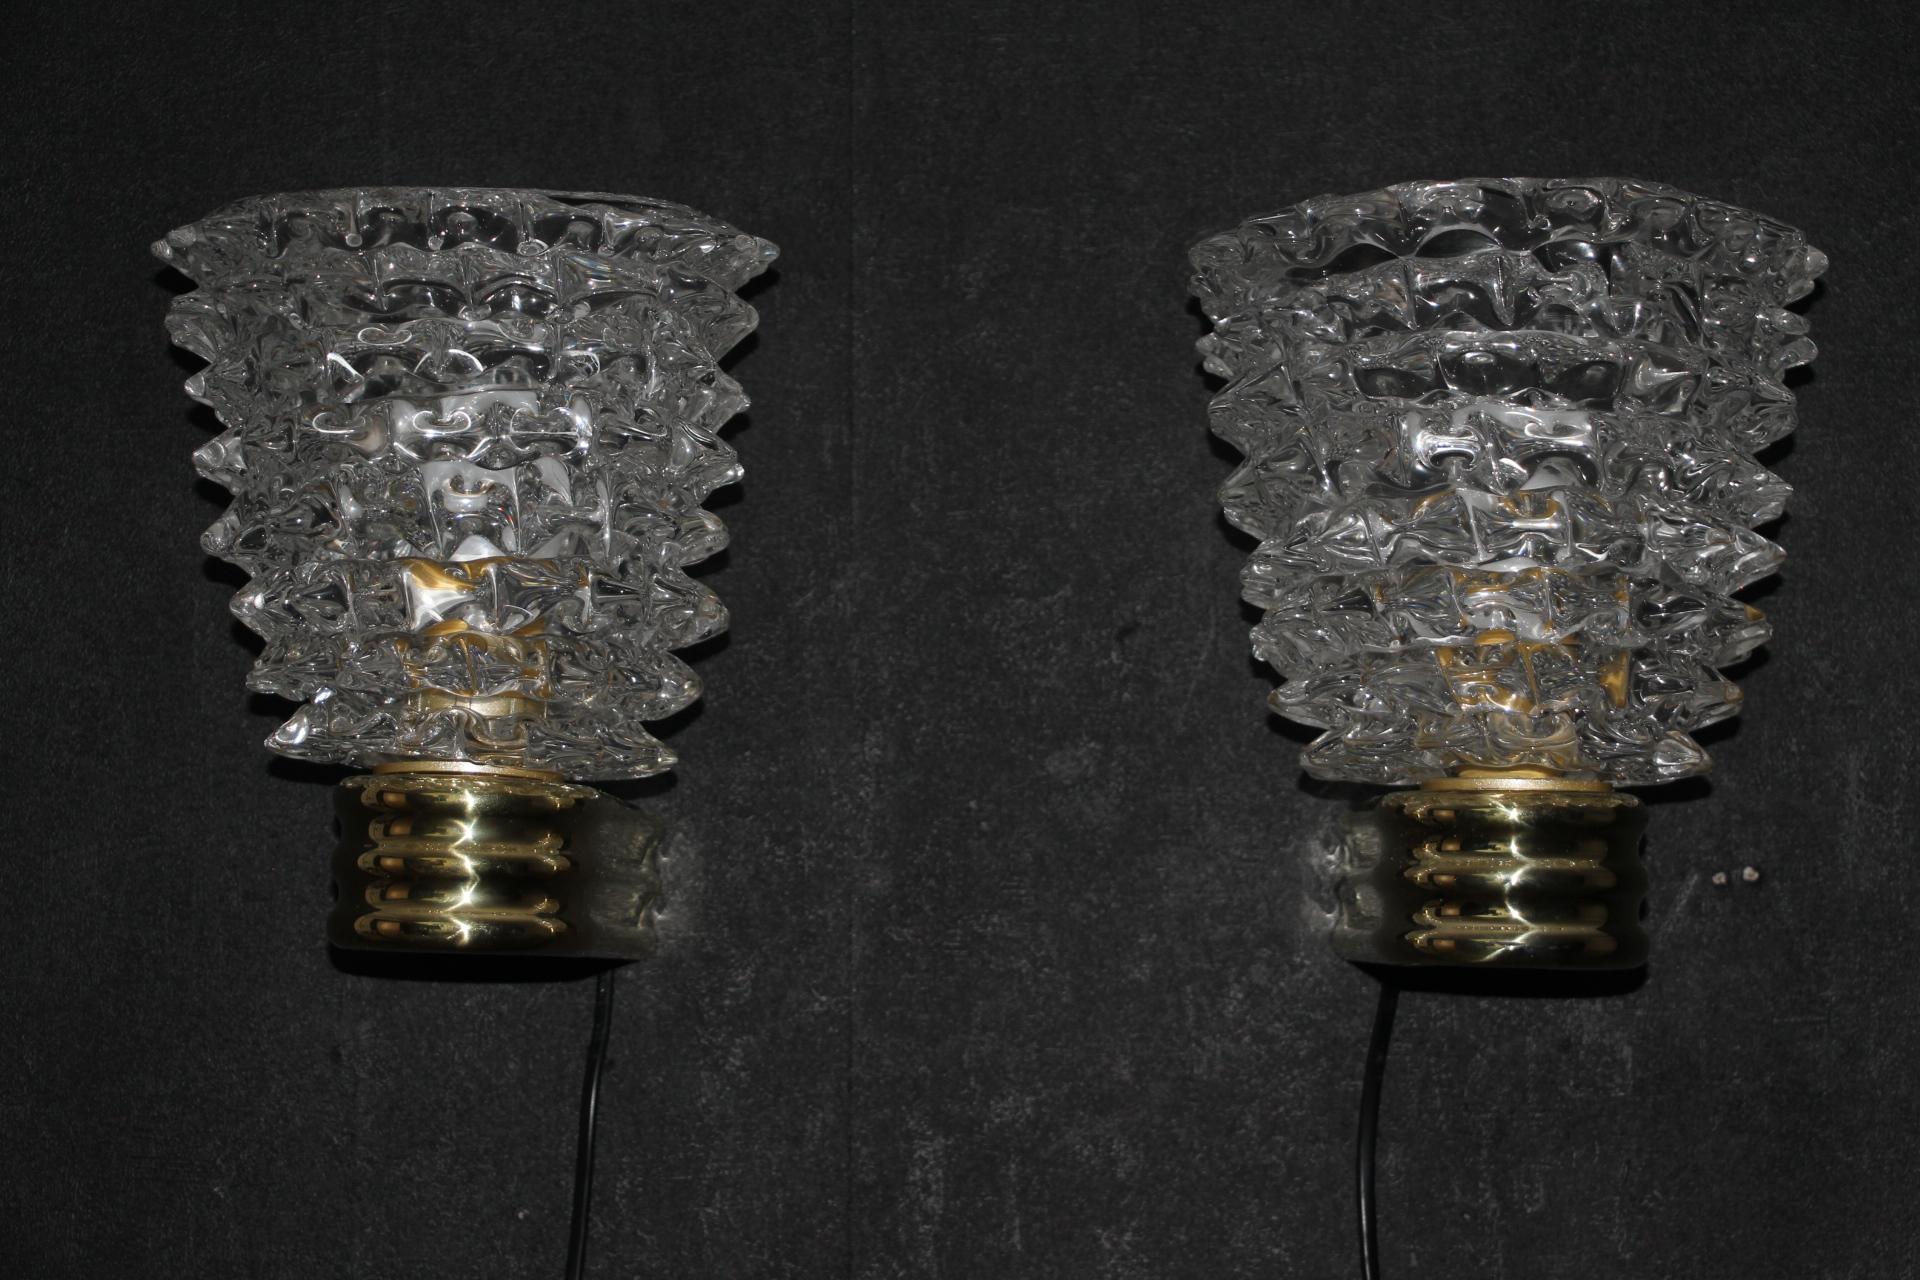 This magnificent pair of sconces from Murano was made according to the hand made rostrato glass technique . It means that each spike of glass was individually pulled in relief to get this fabulous 3 D look.
They stand on an elegant polished brass